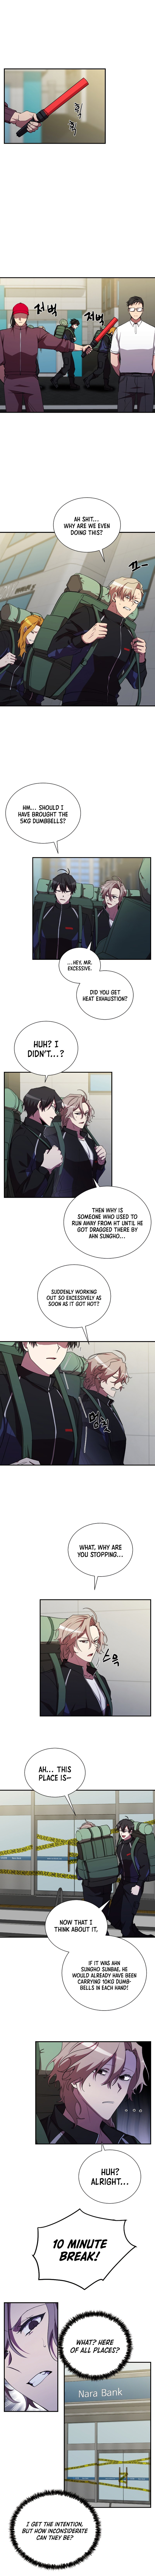 My School Life Pretending To Be a Worthless Person - Chapter 30 Page 2